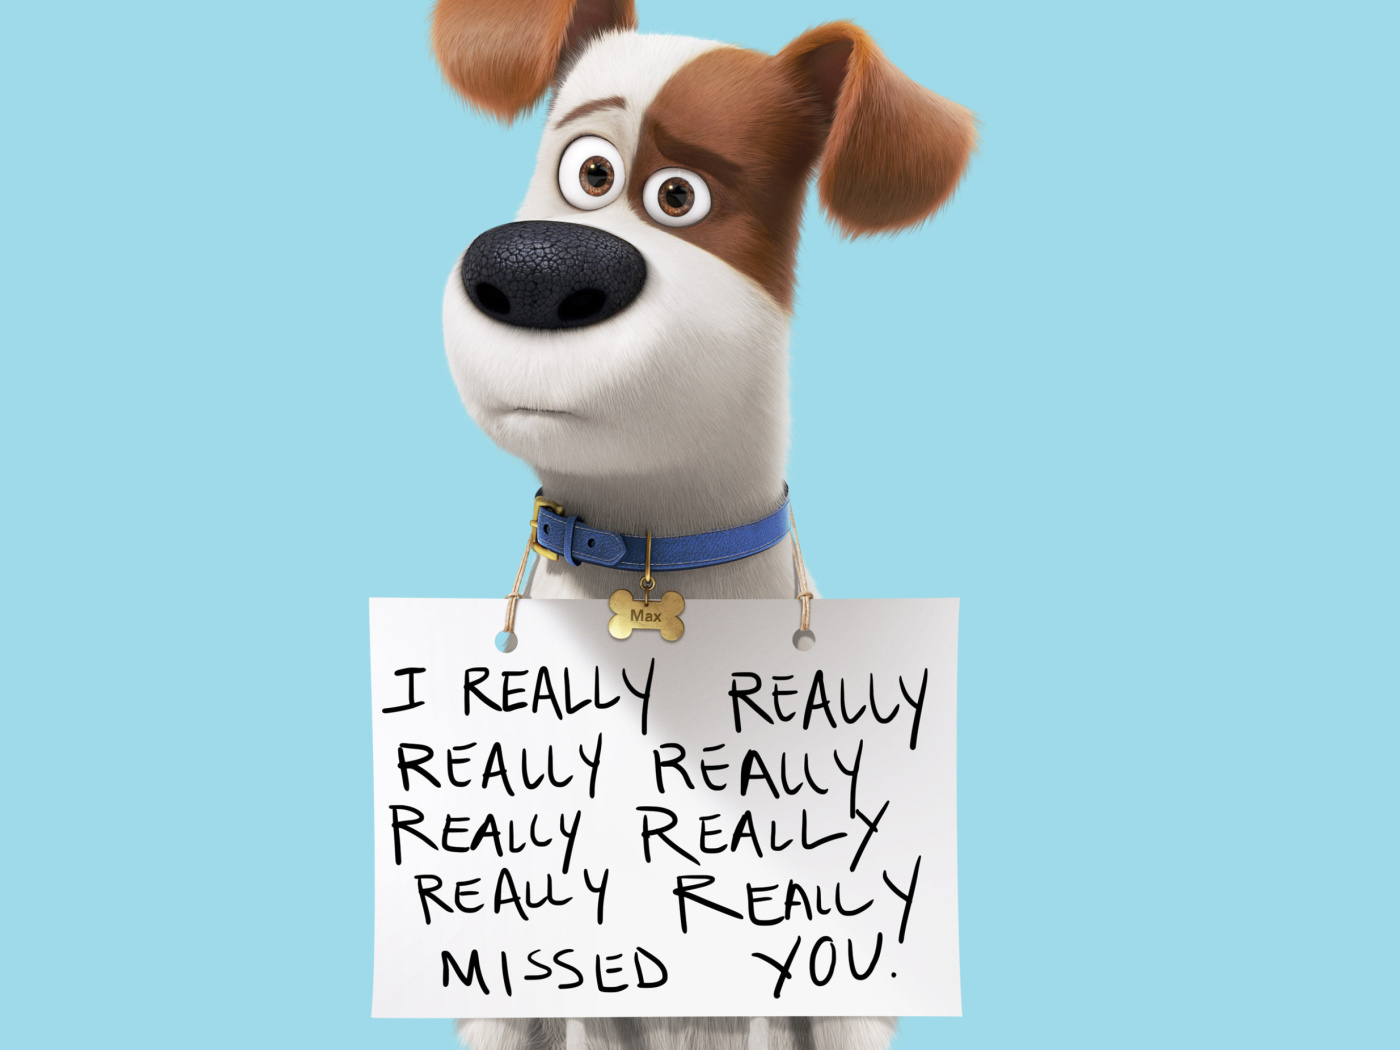 Das Max from The Secret Life of Pets Wallpaper 1400x1050